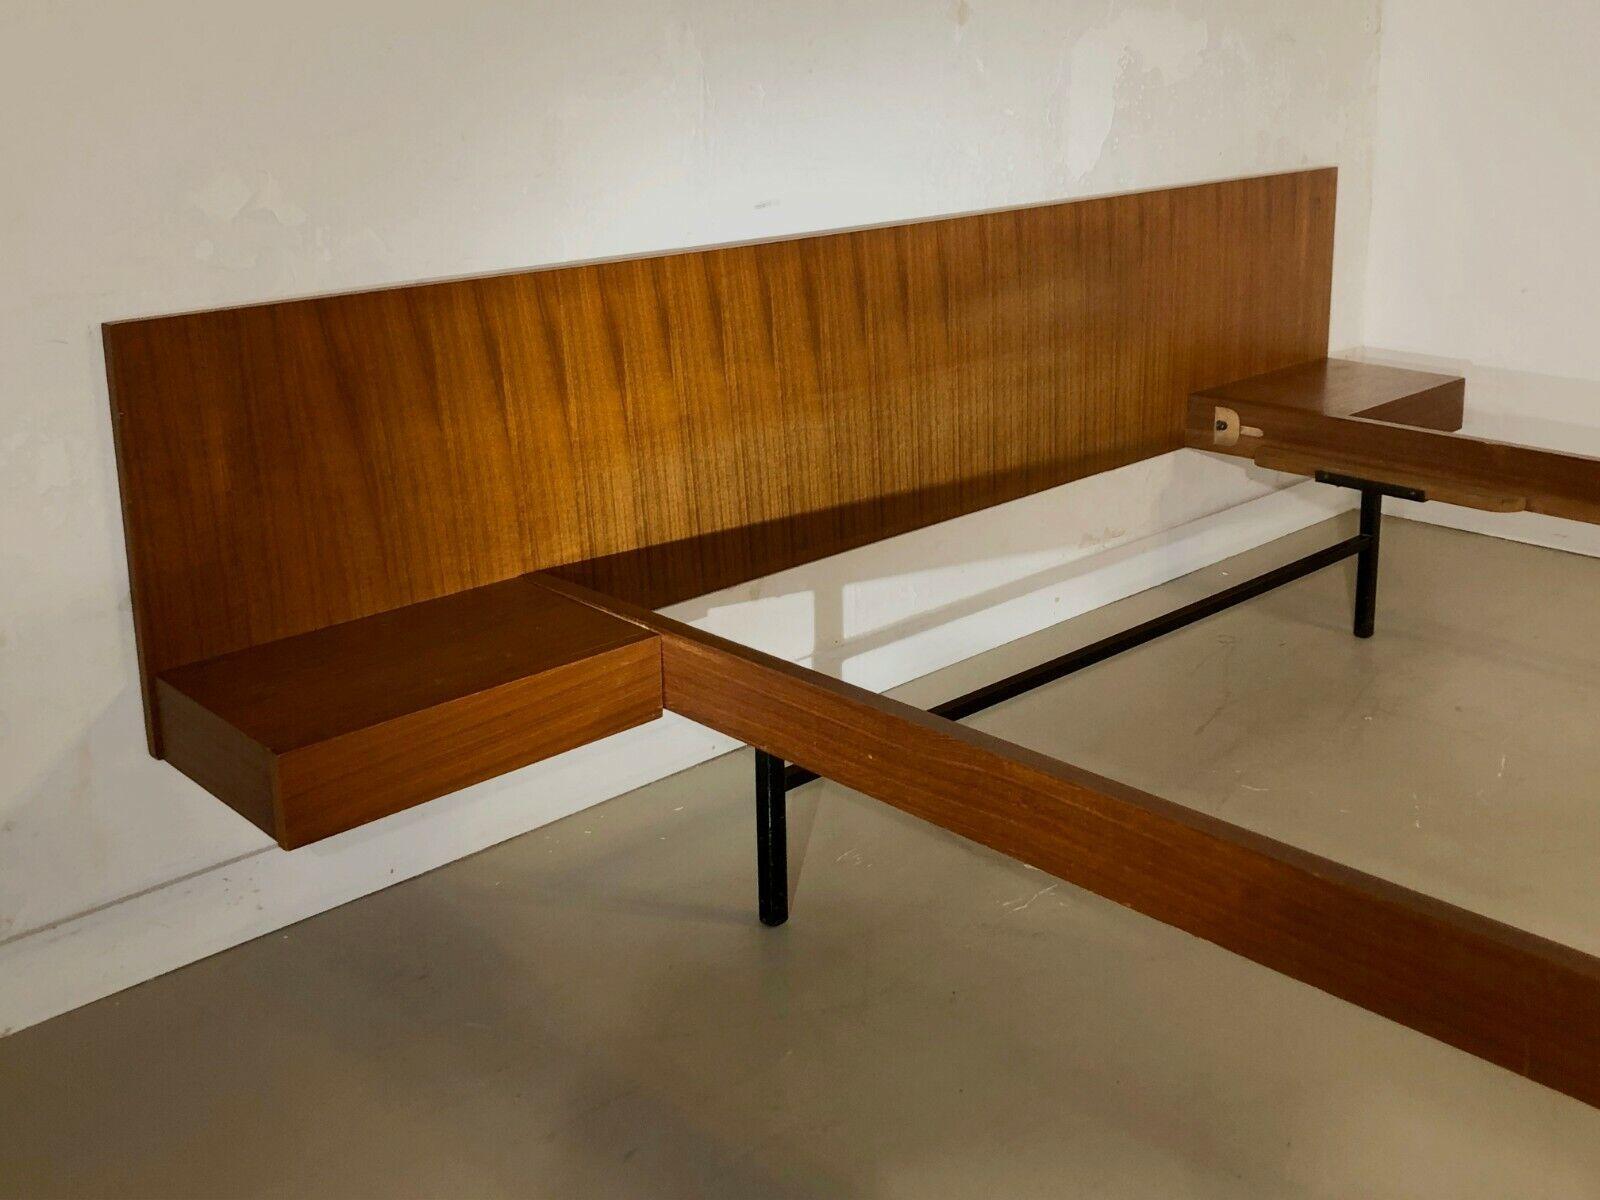 A MID-CENTURY-MODERN Double Bed by JOSEPH-ANDRE MOTTE, CHARRON, France 1950 For Sale 1